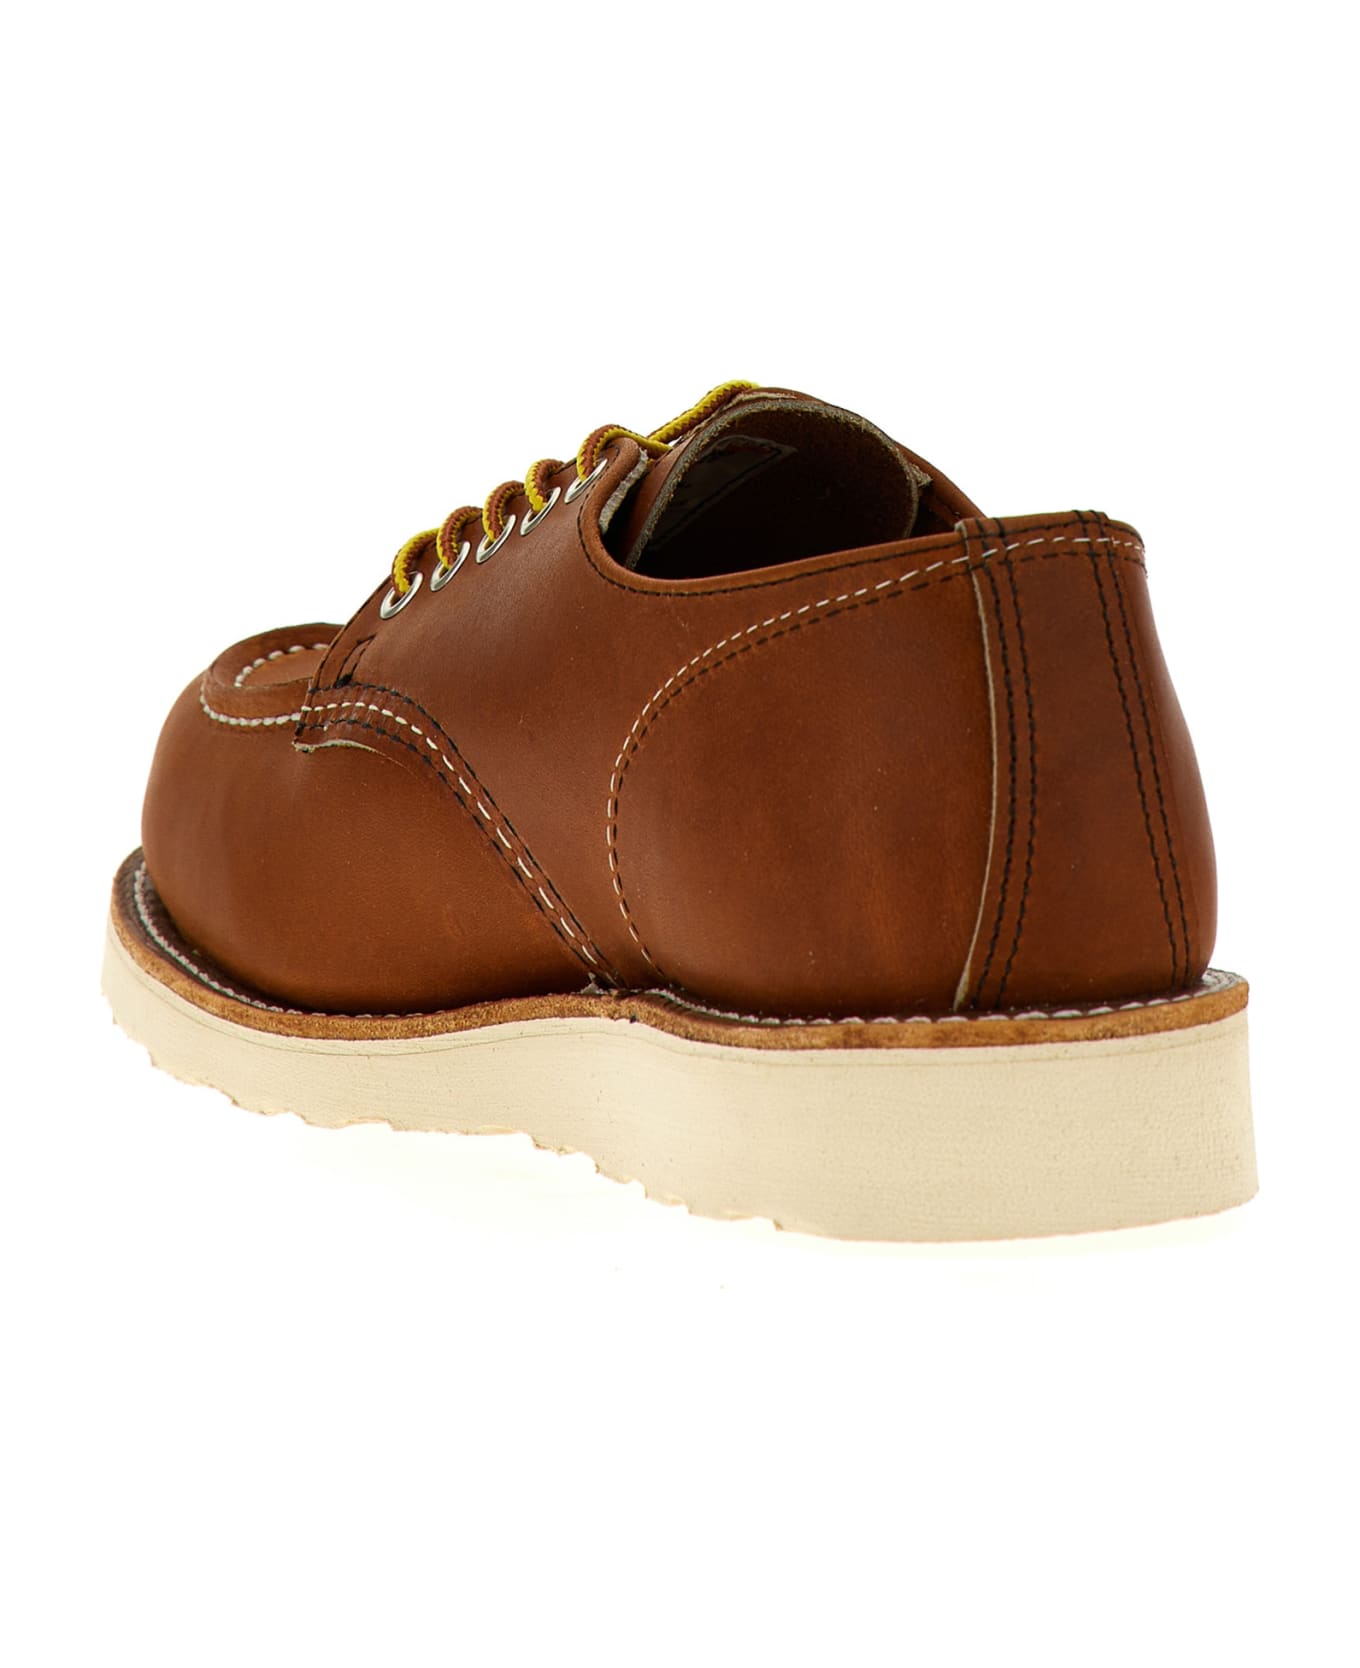 Red Wing 'shop Moc Oxford' Lace Up Shoes - Brown ローファー＆デッキシューズ